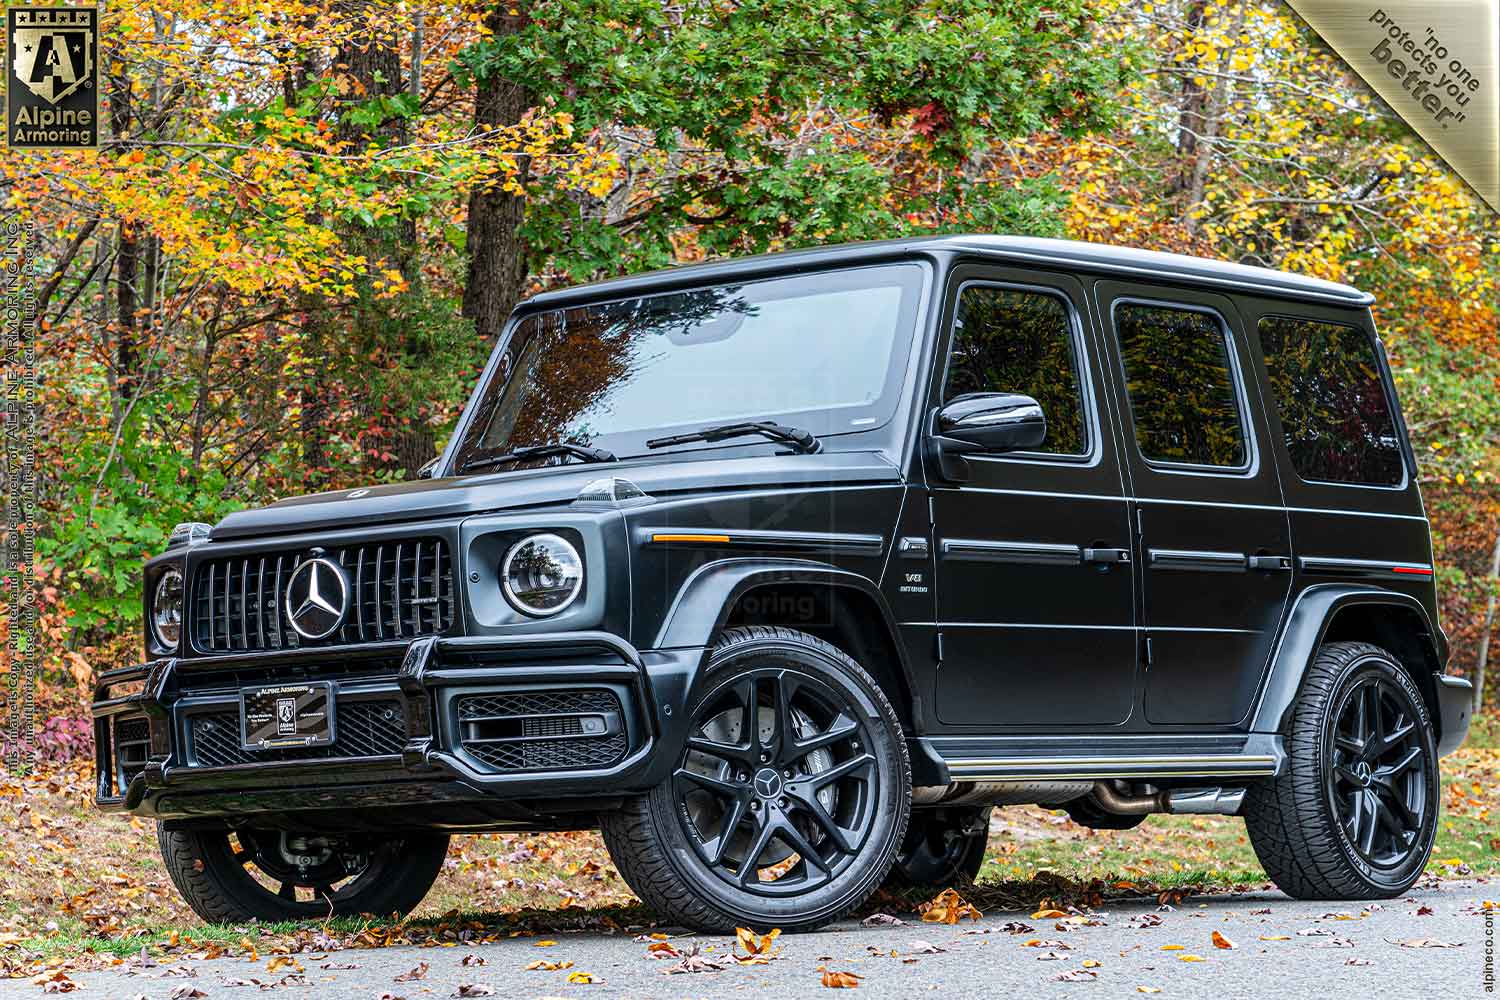 New Inventory armored Mercedes-Benz G63 Level A9/B6+ Exterior & Interior Images VIN:1485